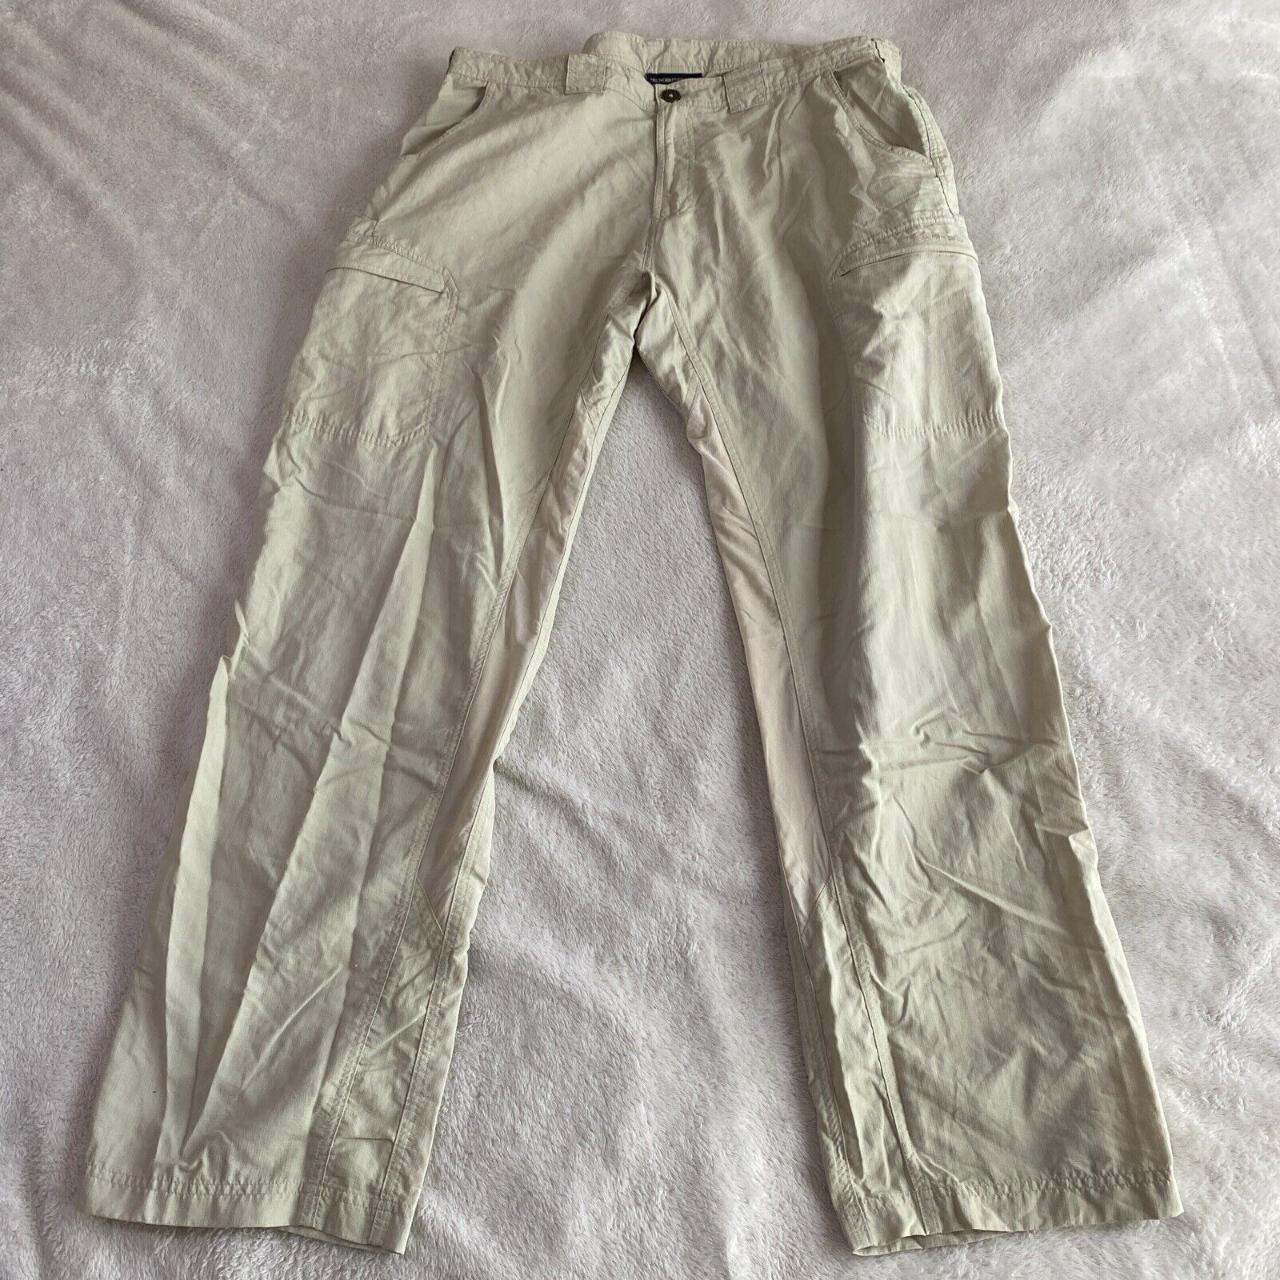 item listed by wholesaleblunder